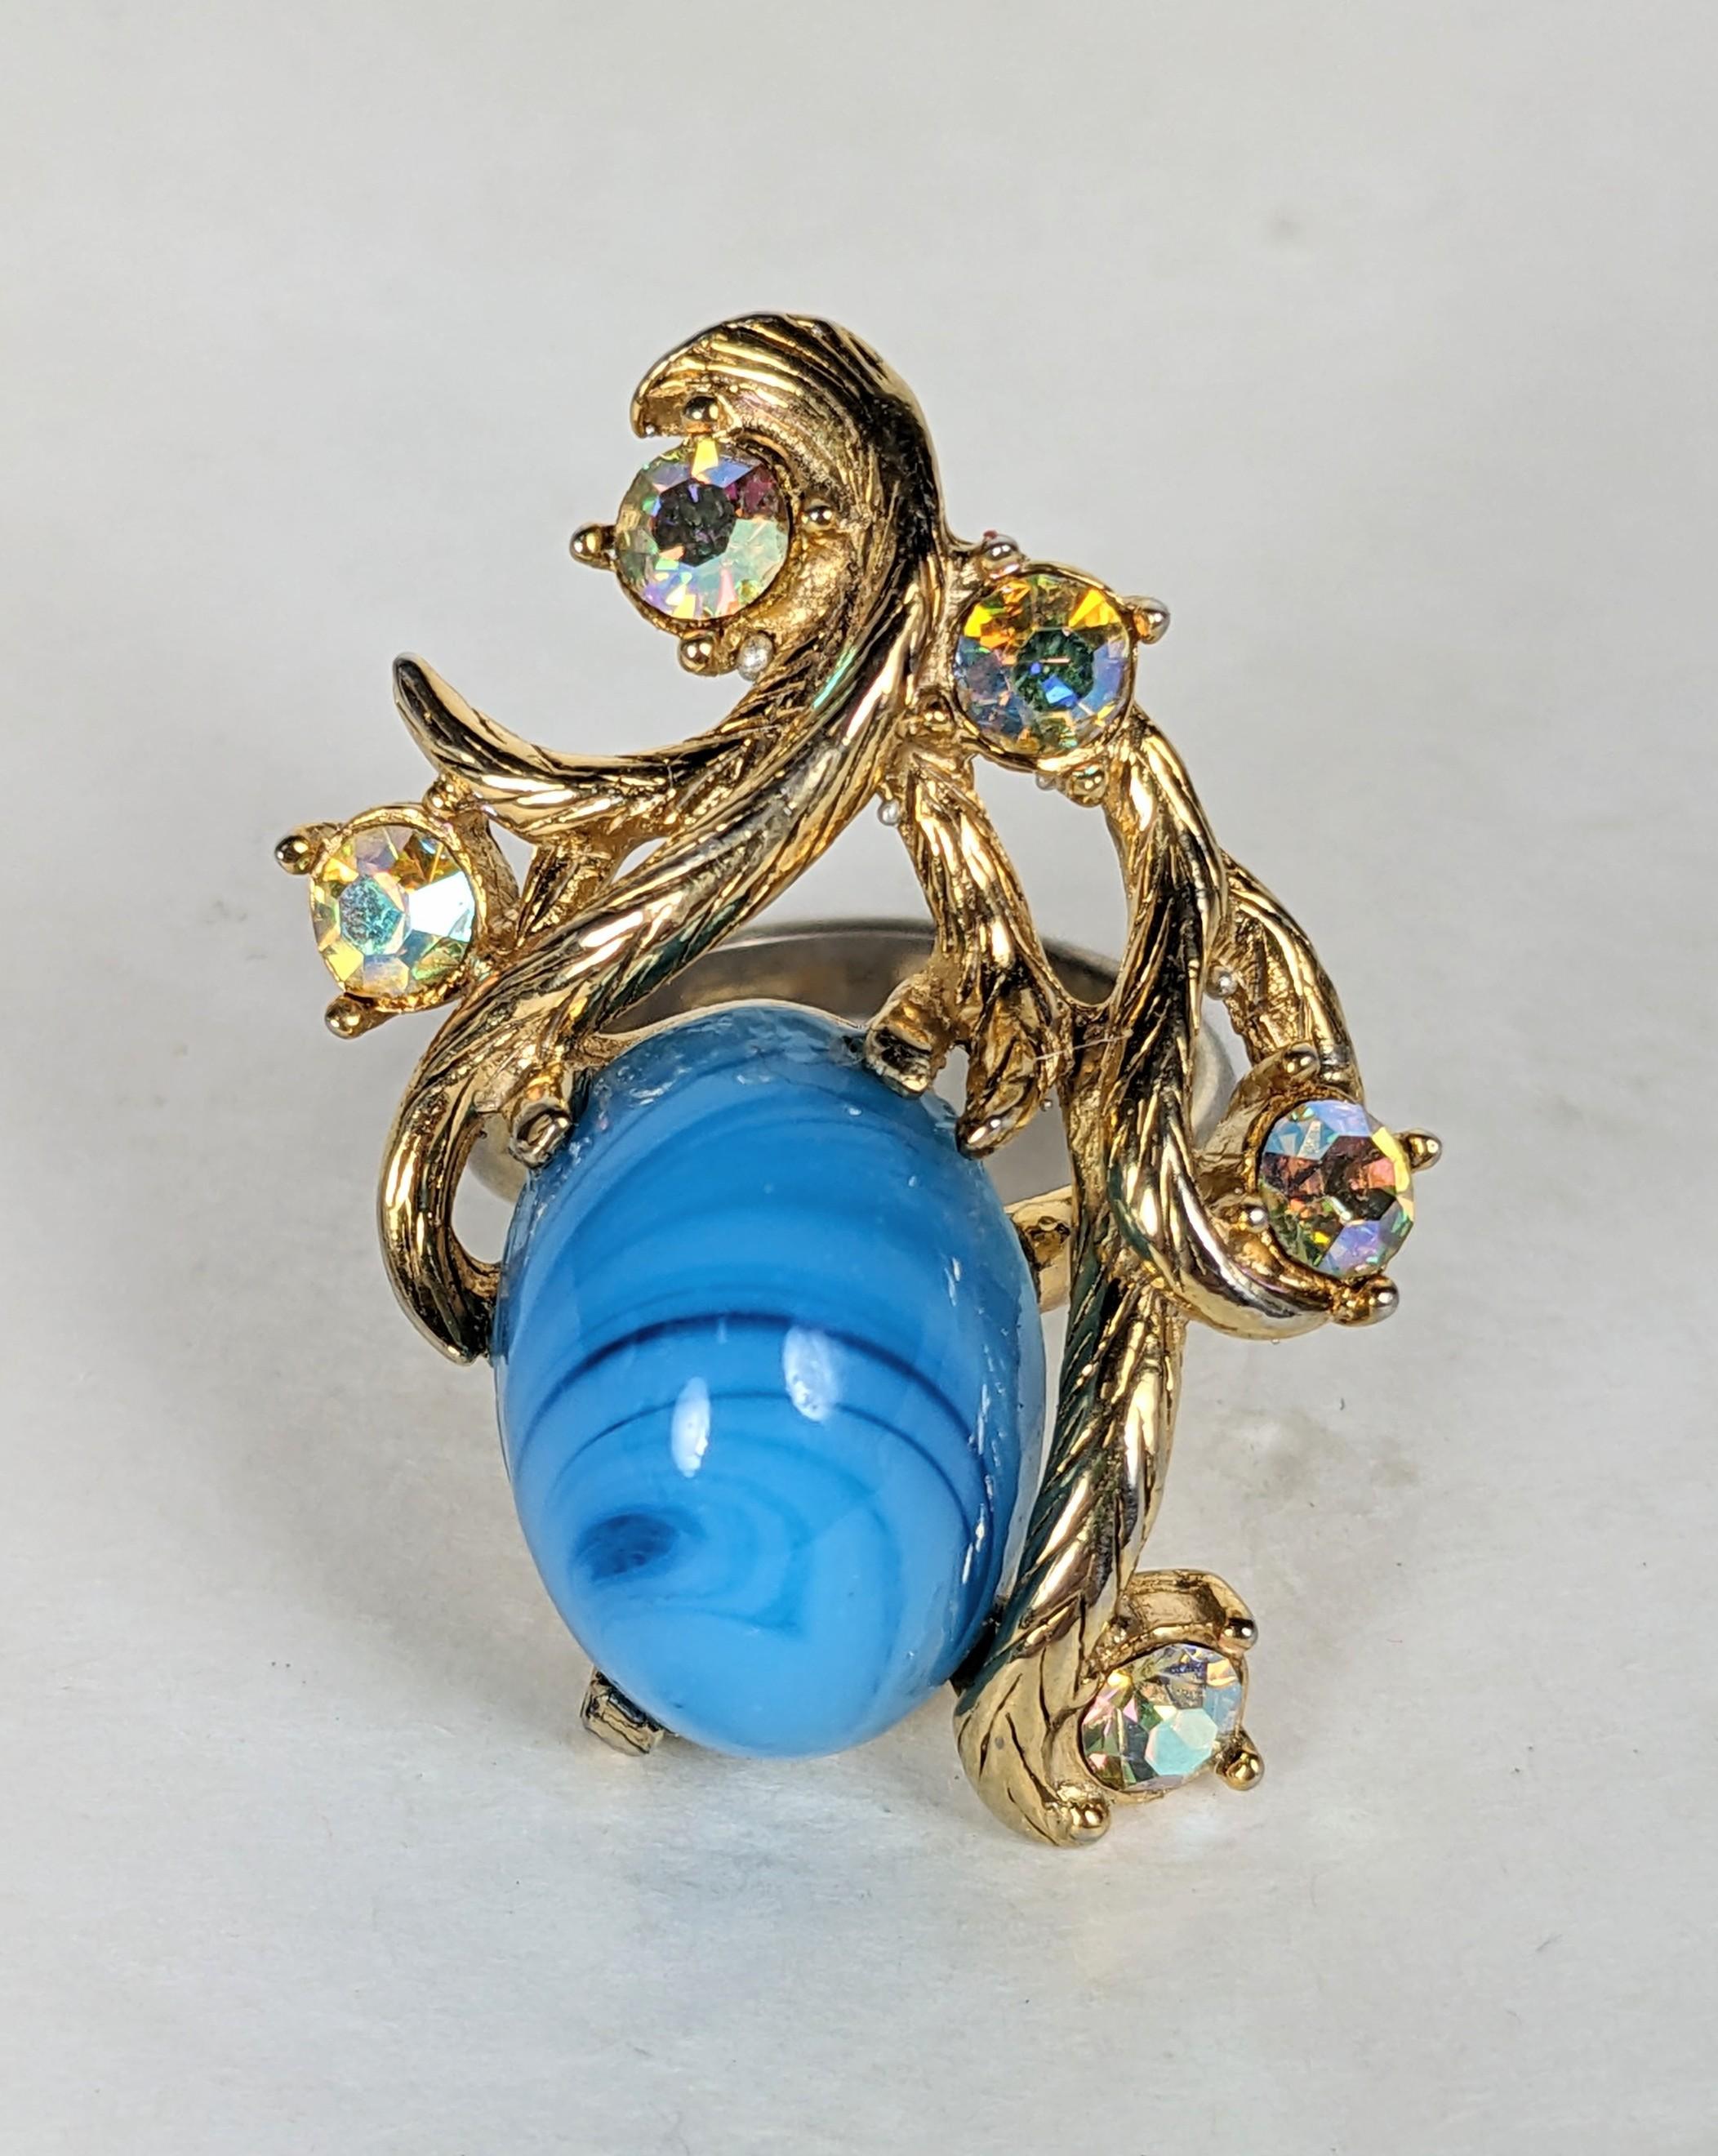 Elsa Schiaparelli Baroque Revival Cocktail Ring. Composed of leafy vine motif textured gilt plate base metal, faux Tibetan turquoise oval cabochon, with aurora iridized glass, in pink/blue/gold faceted  rhinestones. Excellent Condition,